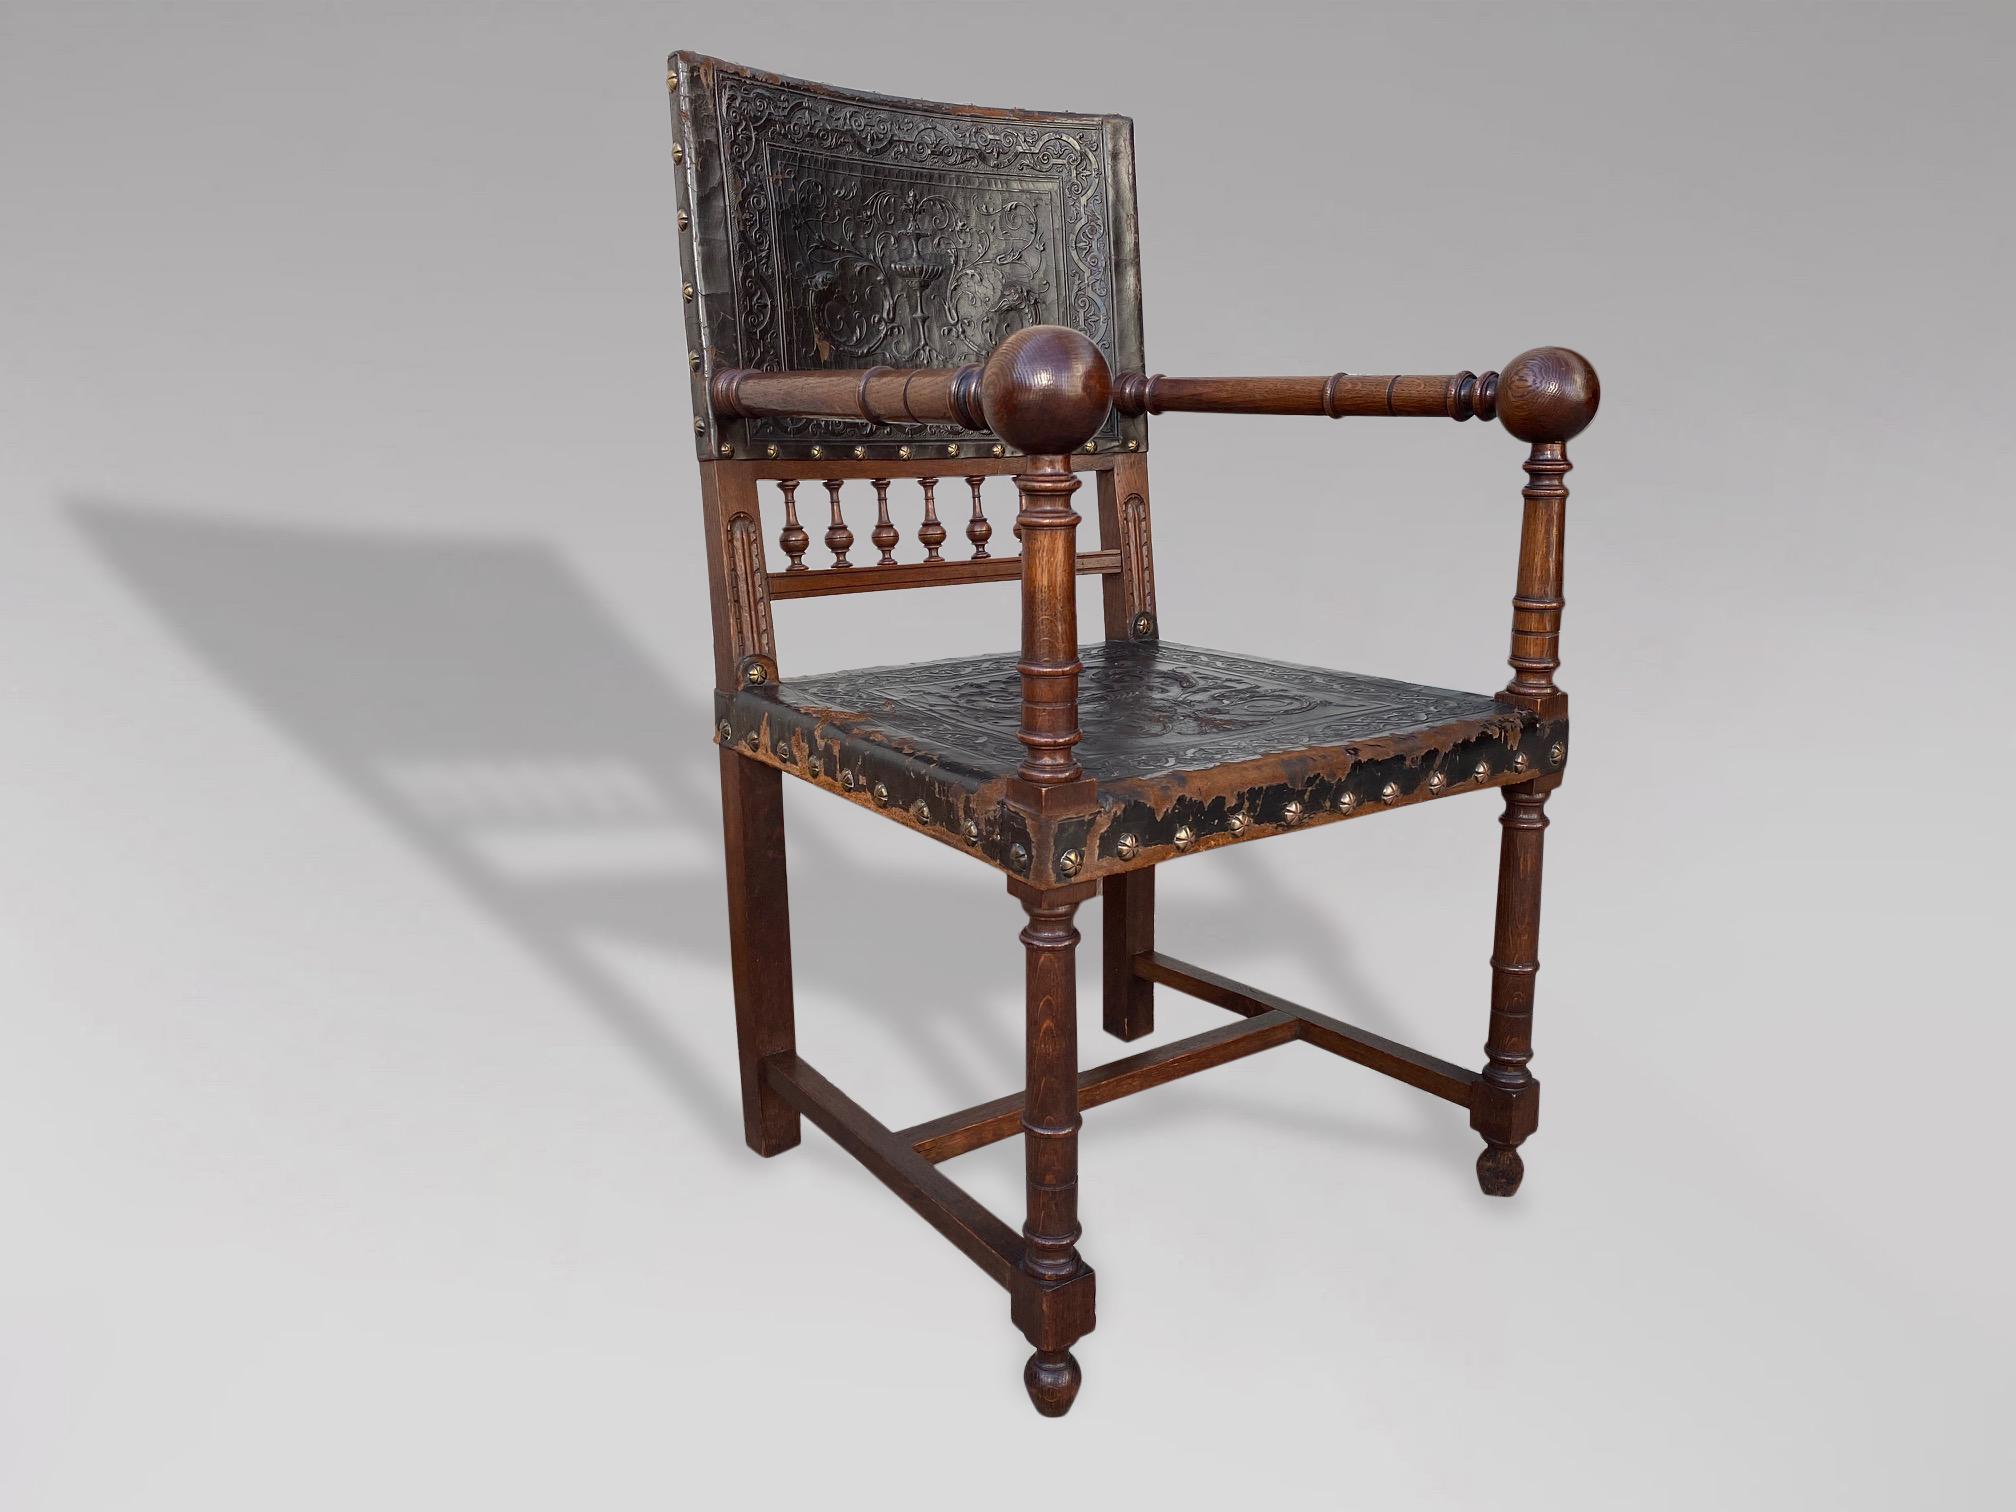 A very good looking 19th century antique French Renaissance Henri II hand-tooled original leather and oak ball arm fauteuil or armchair with beautifully hand carved oak frames and shaped brass studs. Straight turned legs united by a traditional 'H'